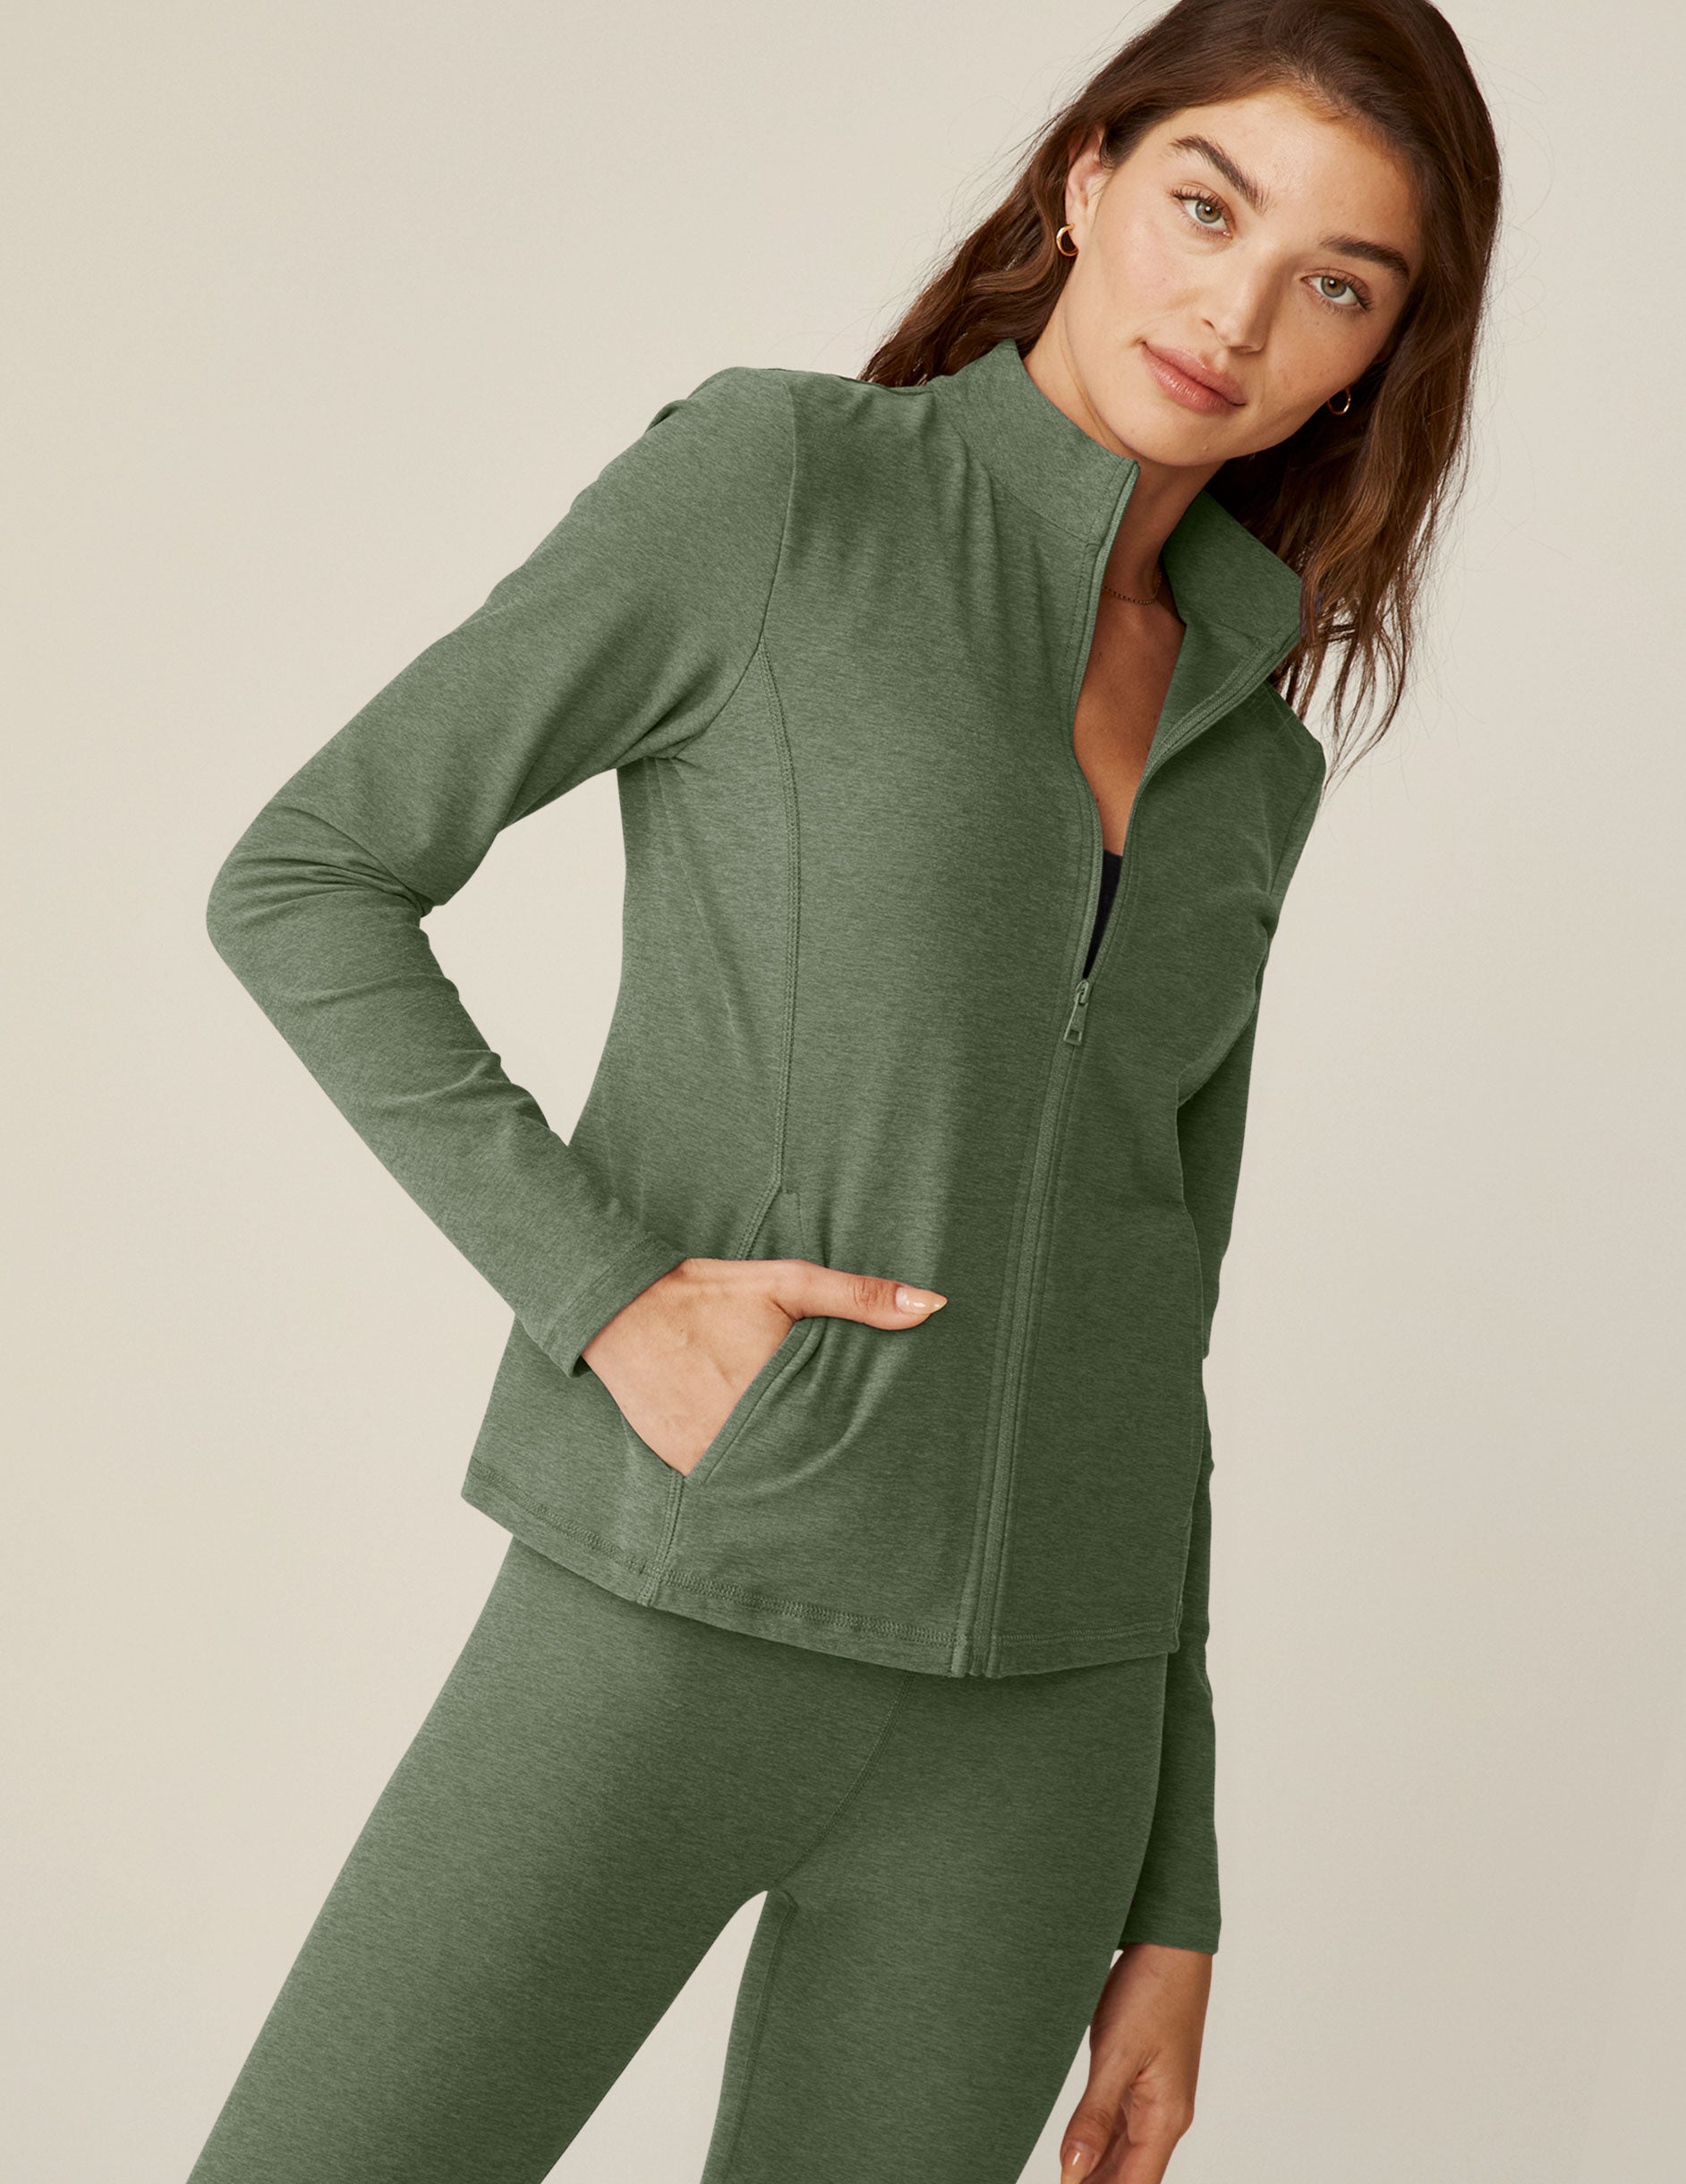 green mock-neck zip-up jacket with pockets.